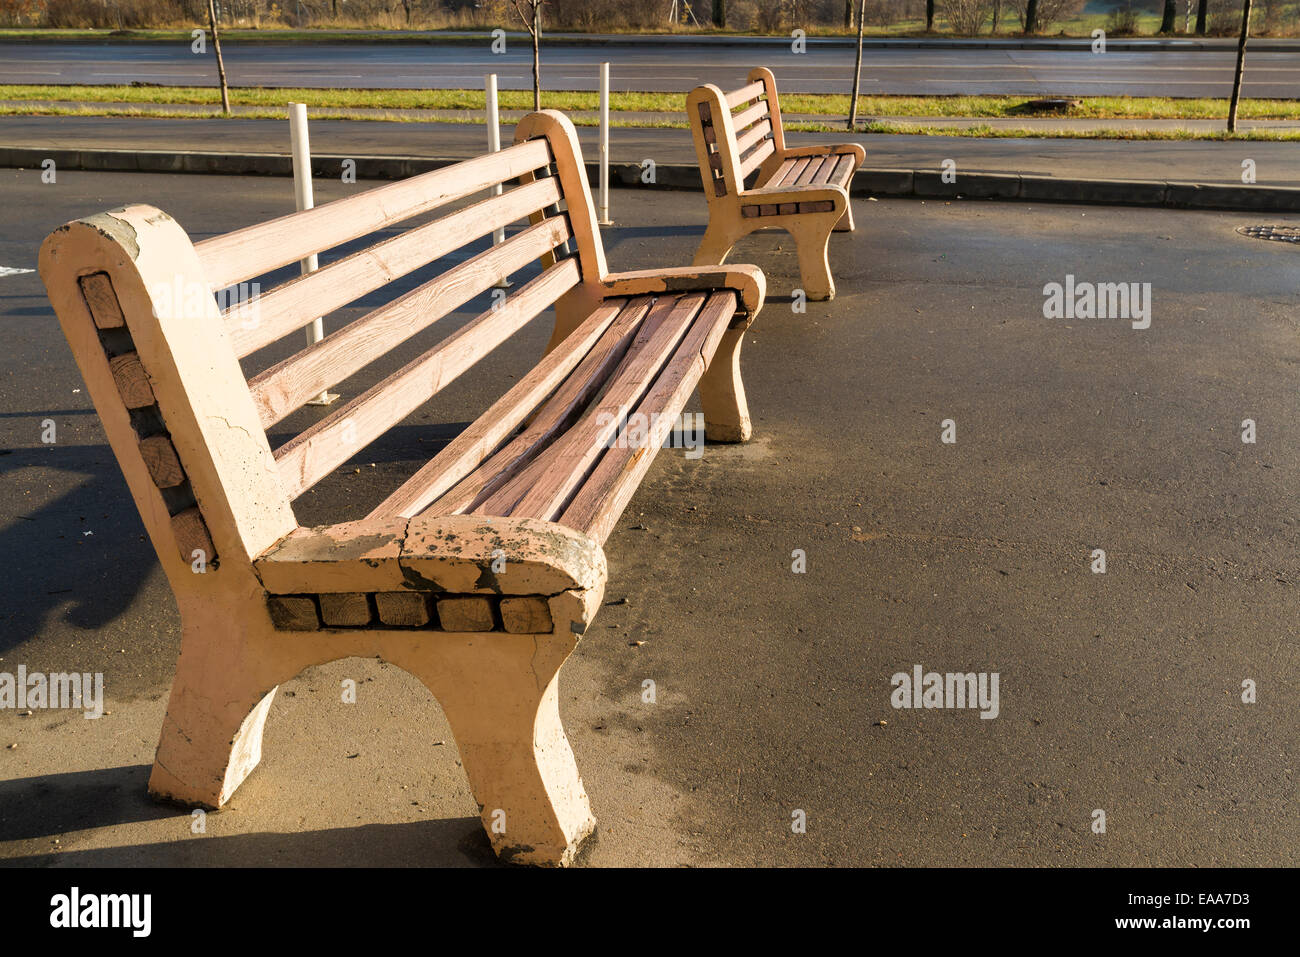 Two wooden benches in the Park Stock Photo